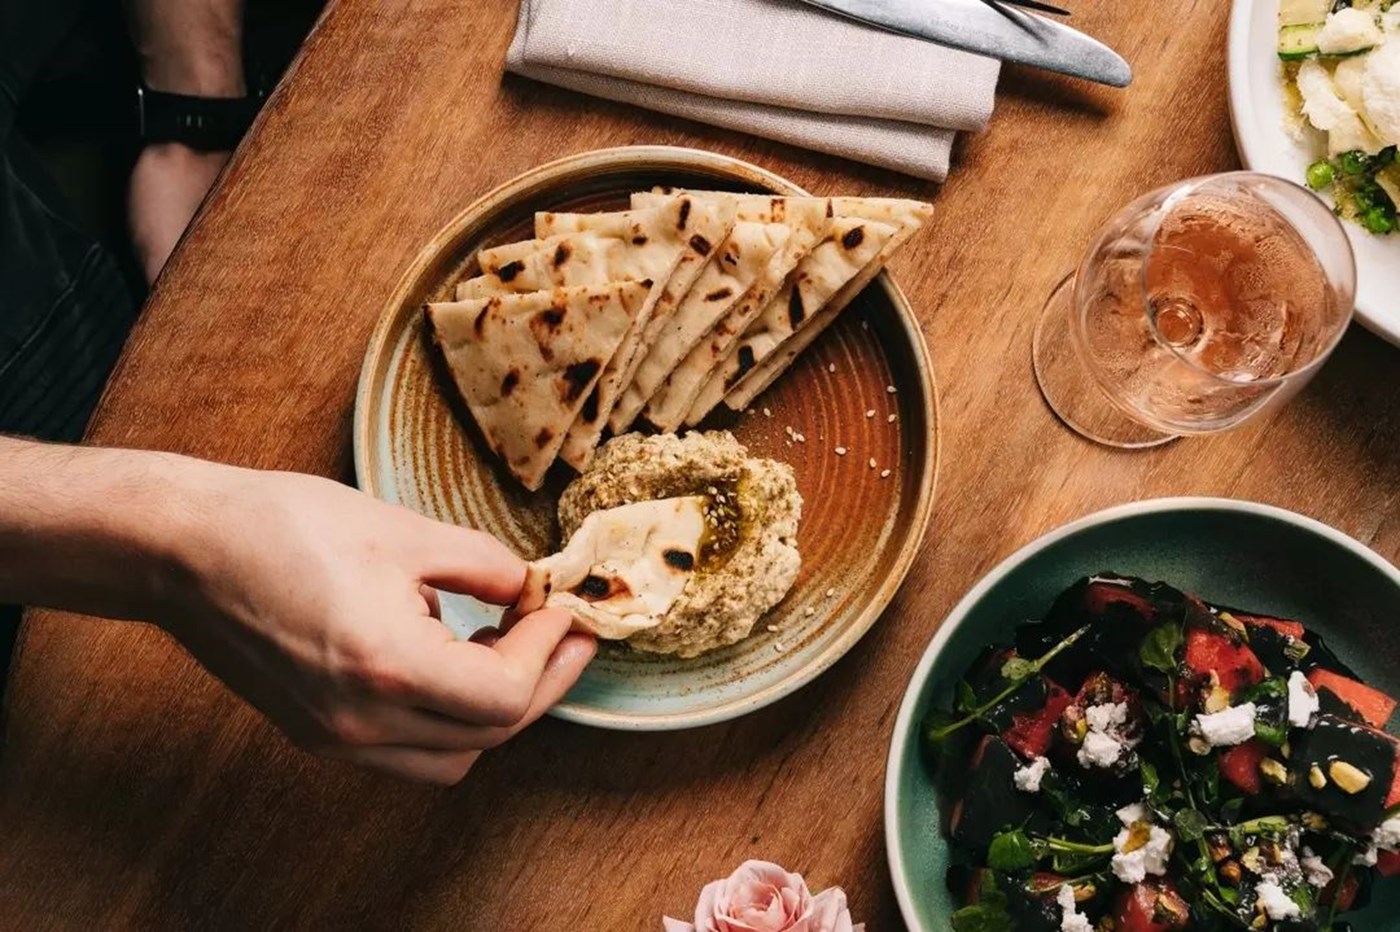 A hand dipping a pitta into dip with a salad and glass of rose to the side 